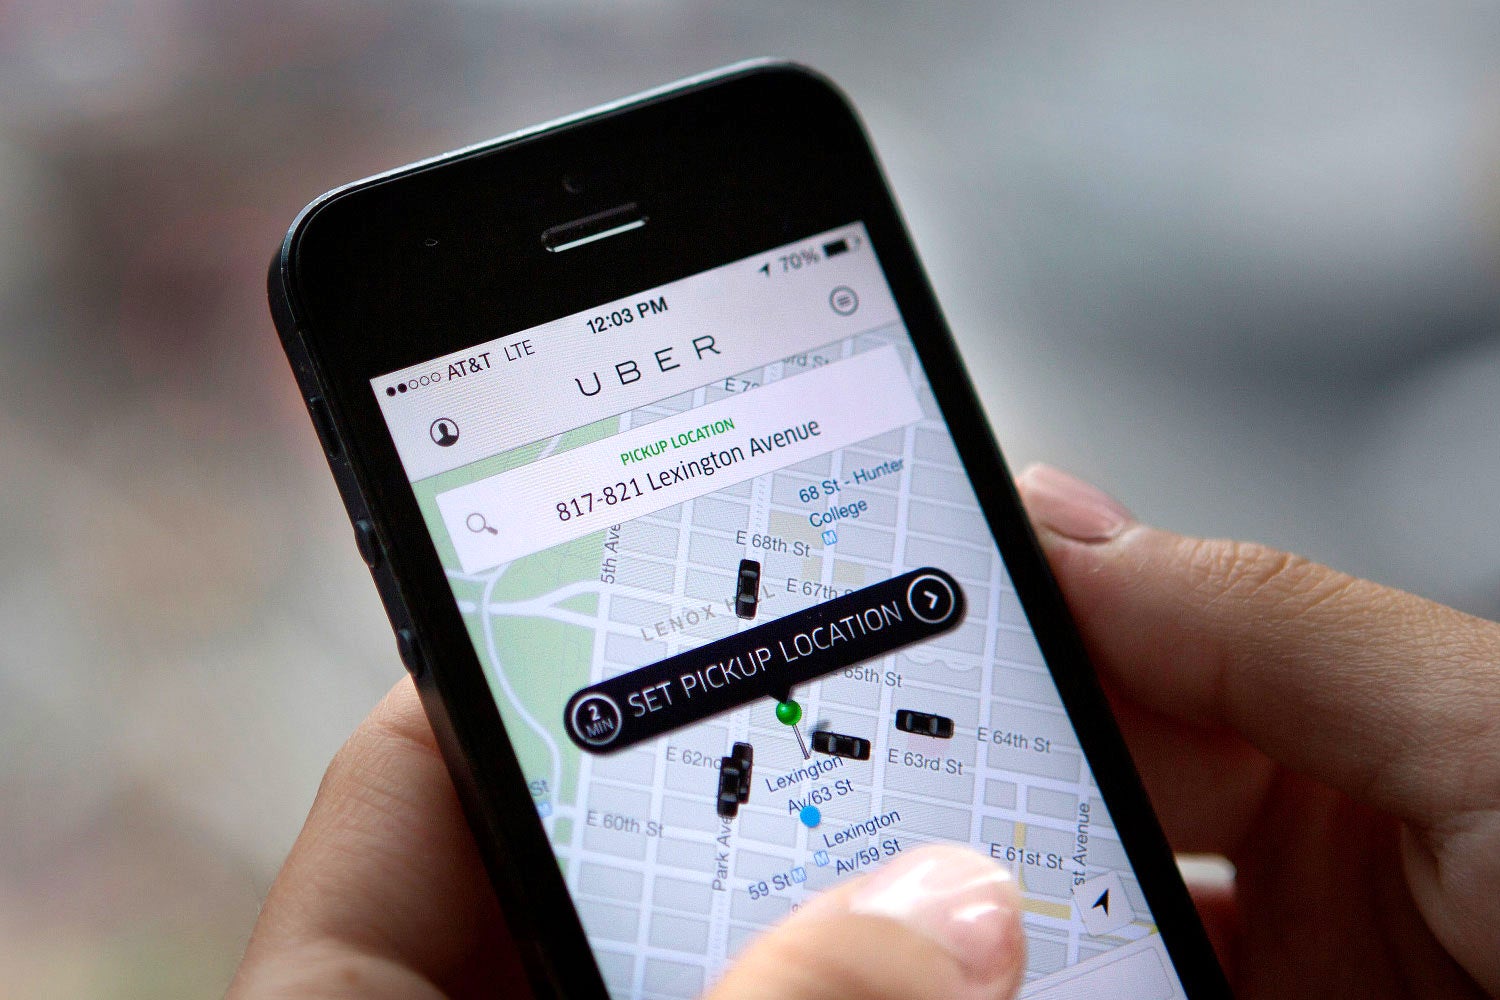 TfL hail Uber CEO to London to discuss licence